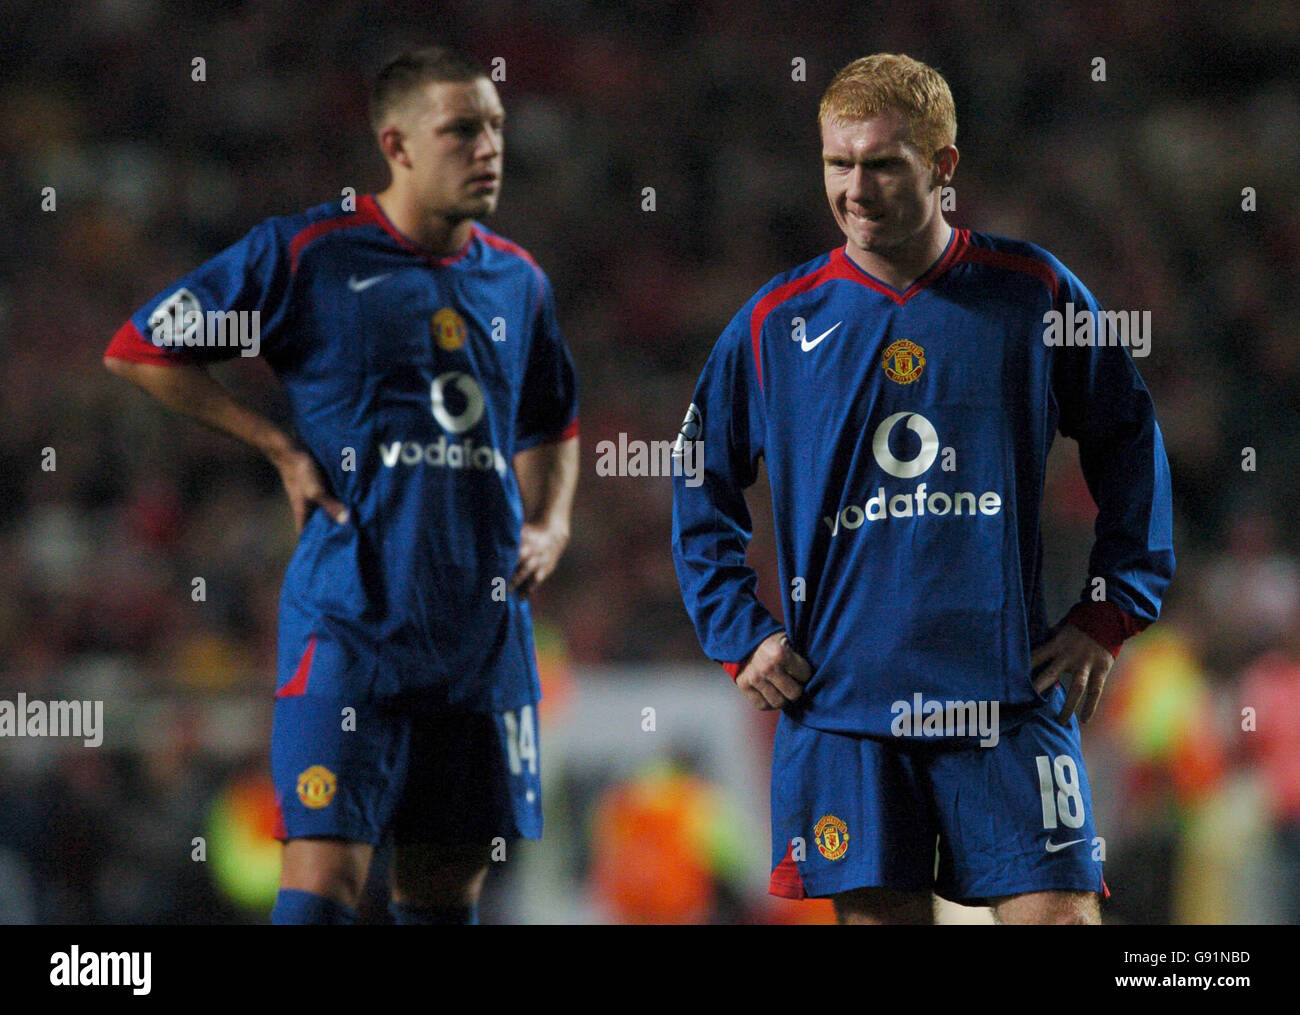 Manchester United's Paul Scholes (r) and Alan Smith (l) stand dejected Stock Photo